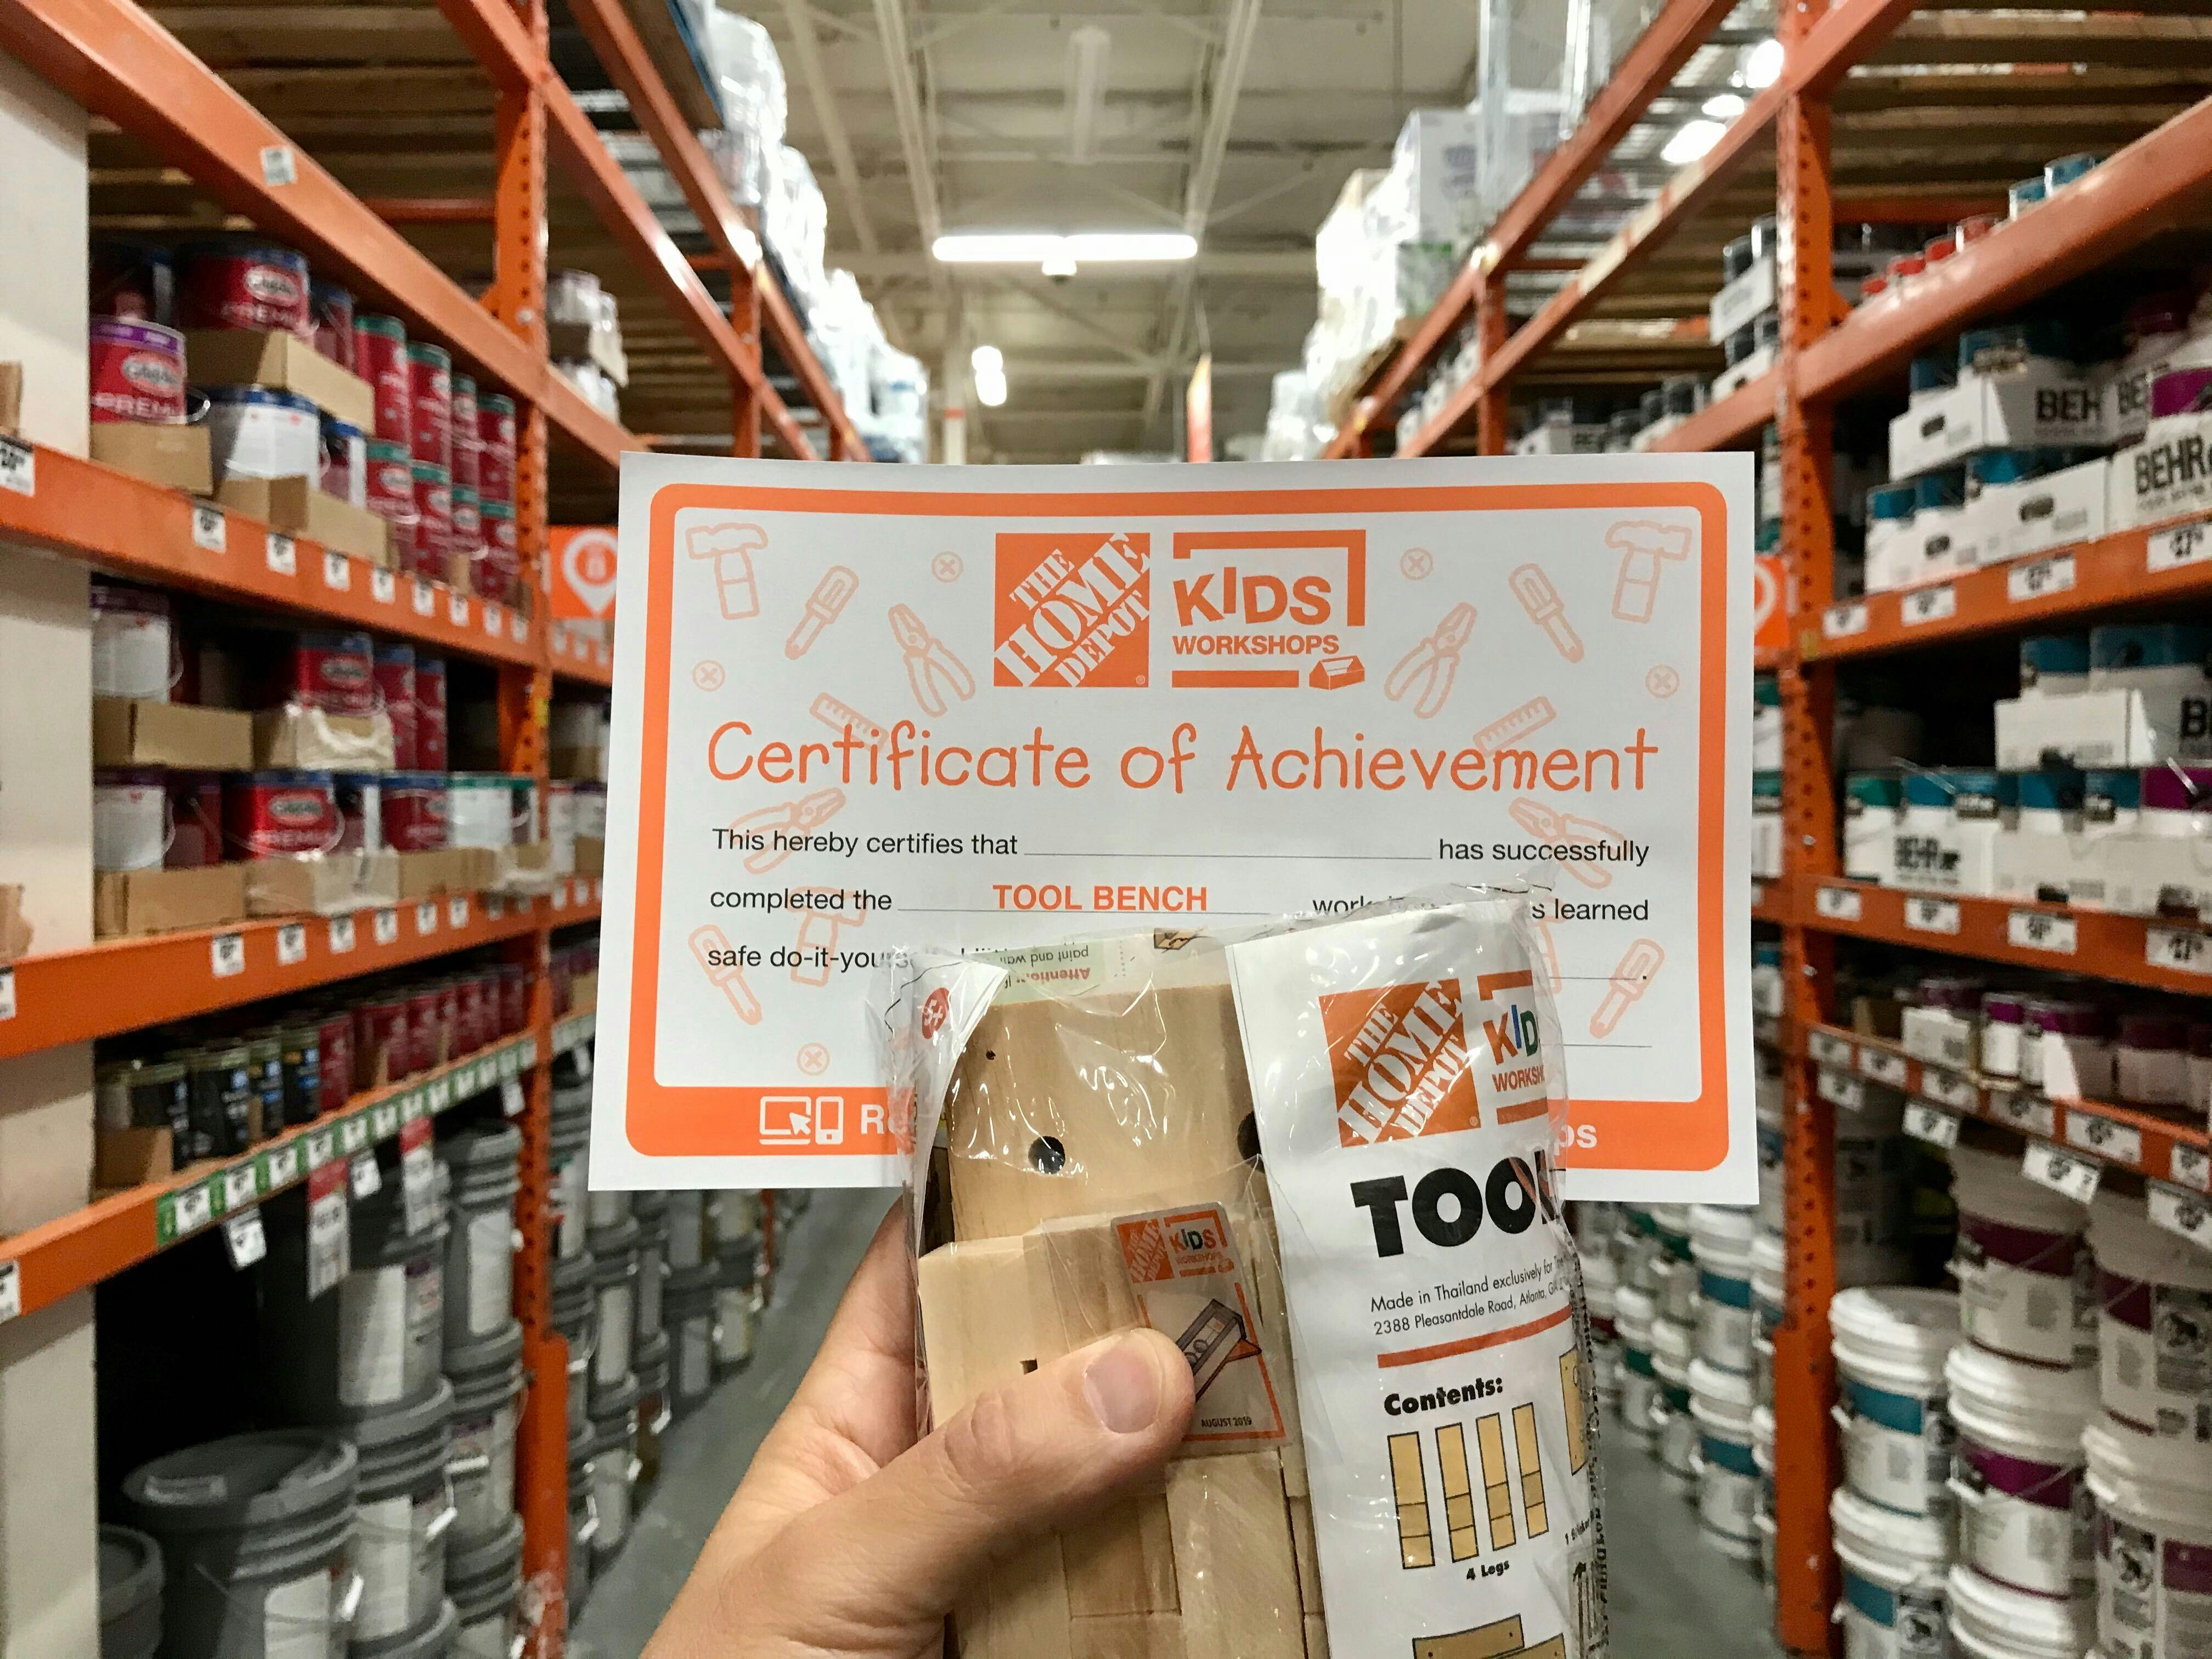 New Home Depot Kids Workshop Crane with Pin and Certificate September 2020 